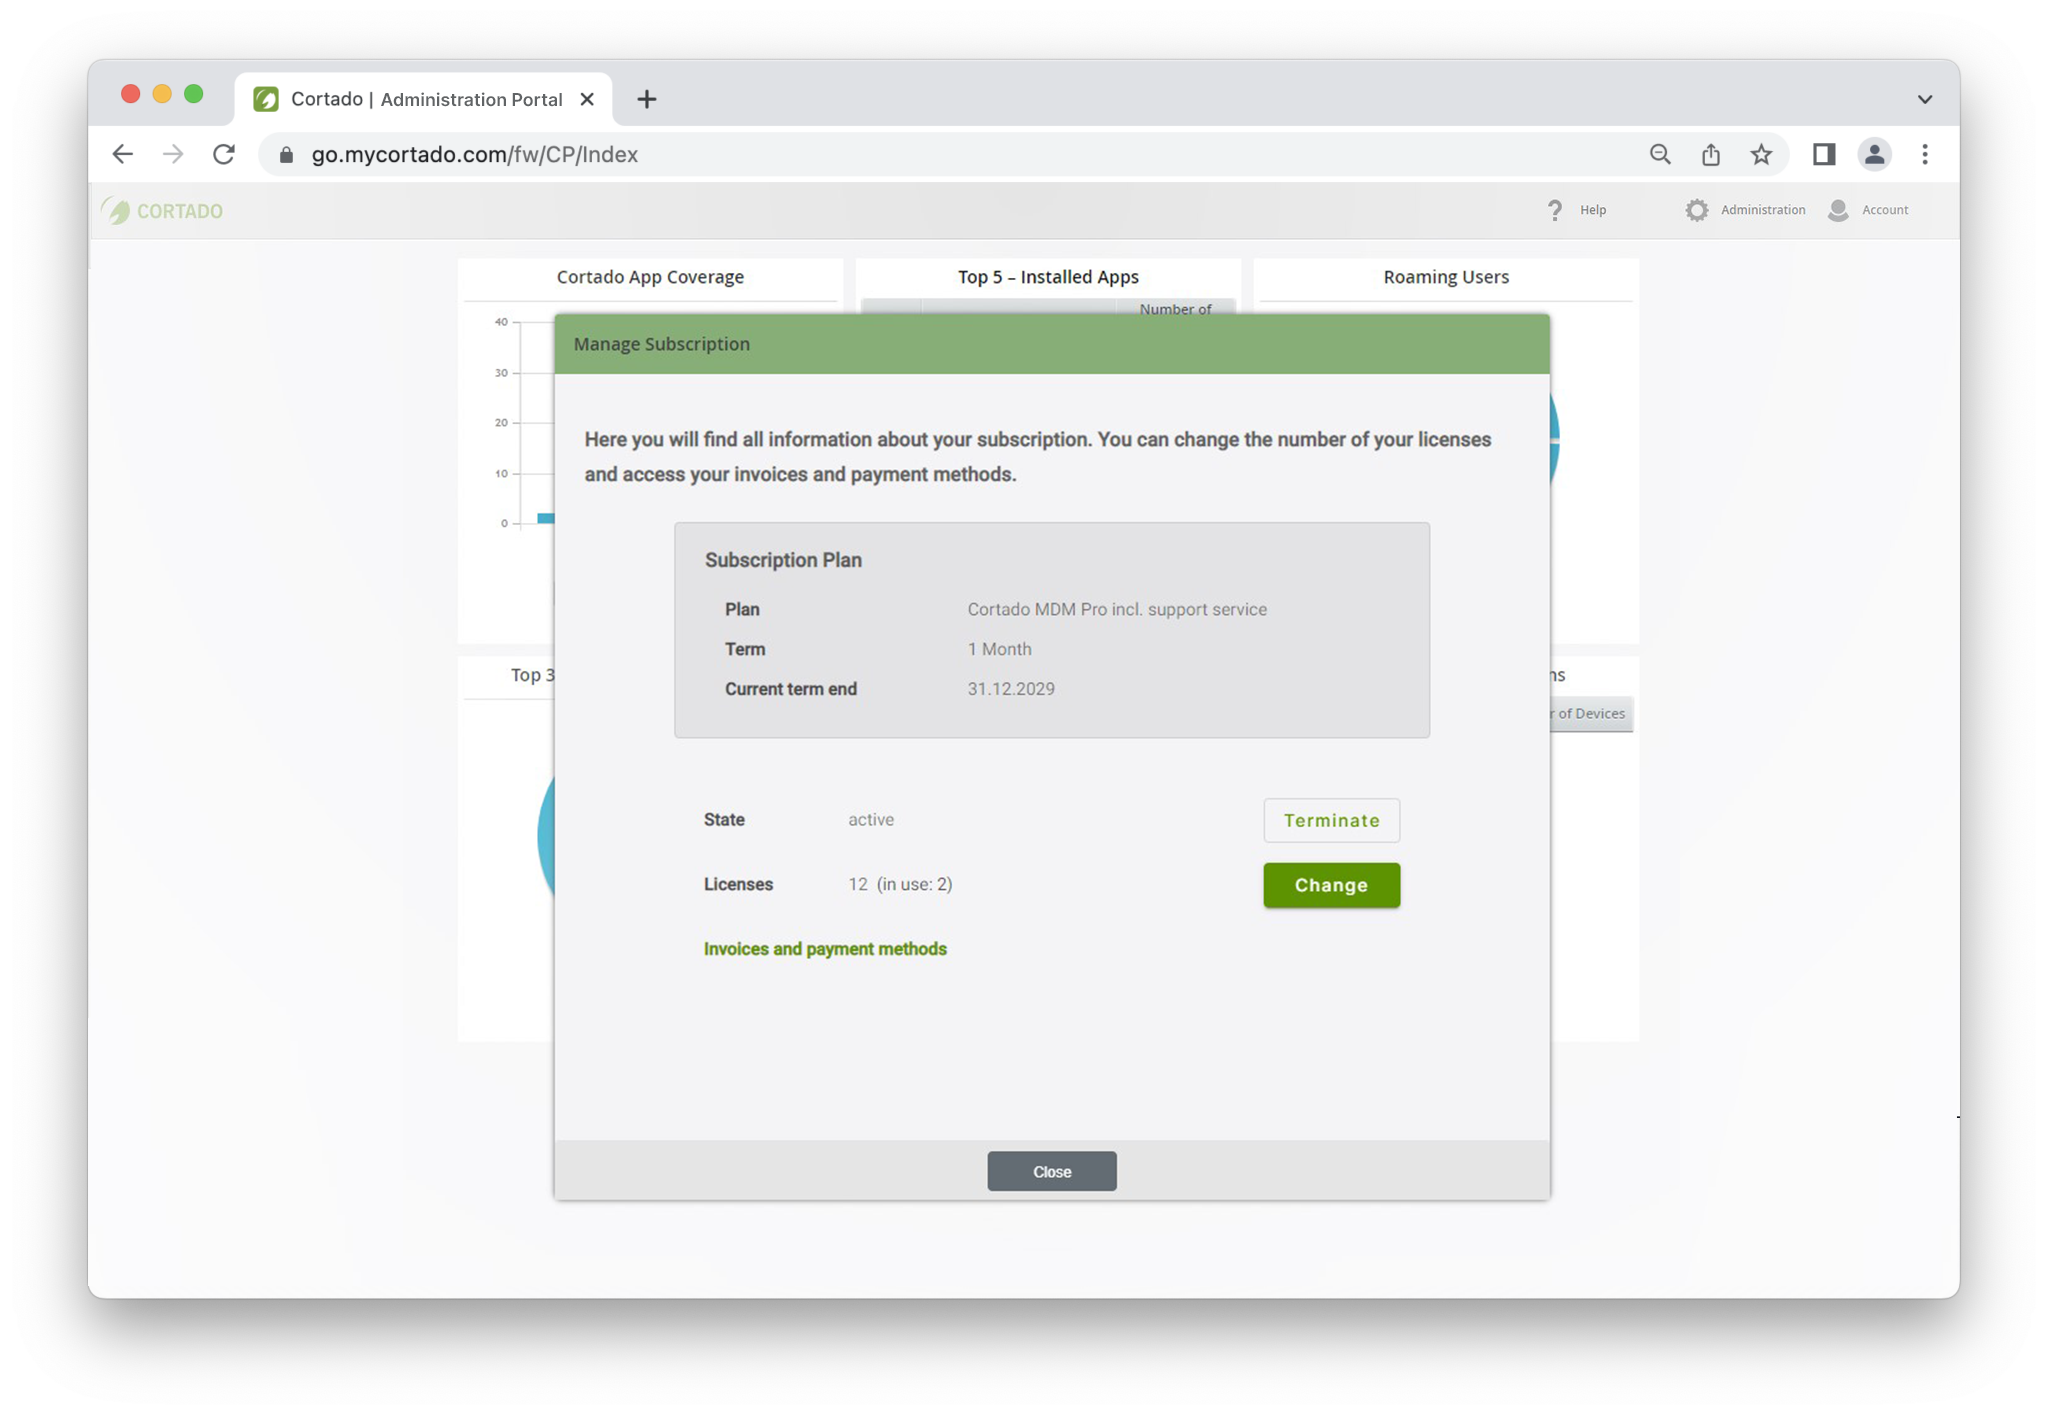 Subscription Management: Now Add Licenses and More Directly from the Admin Portal